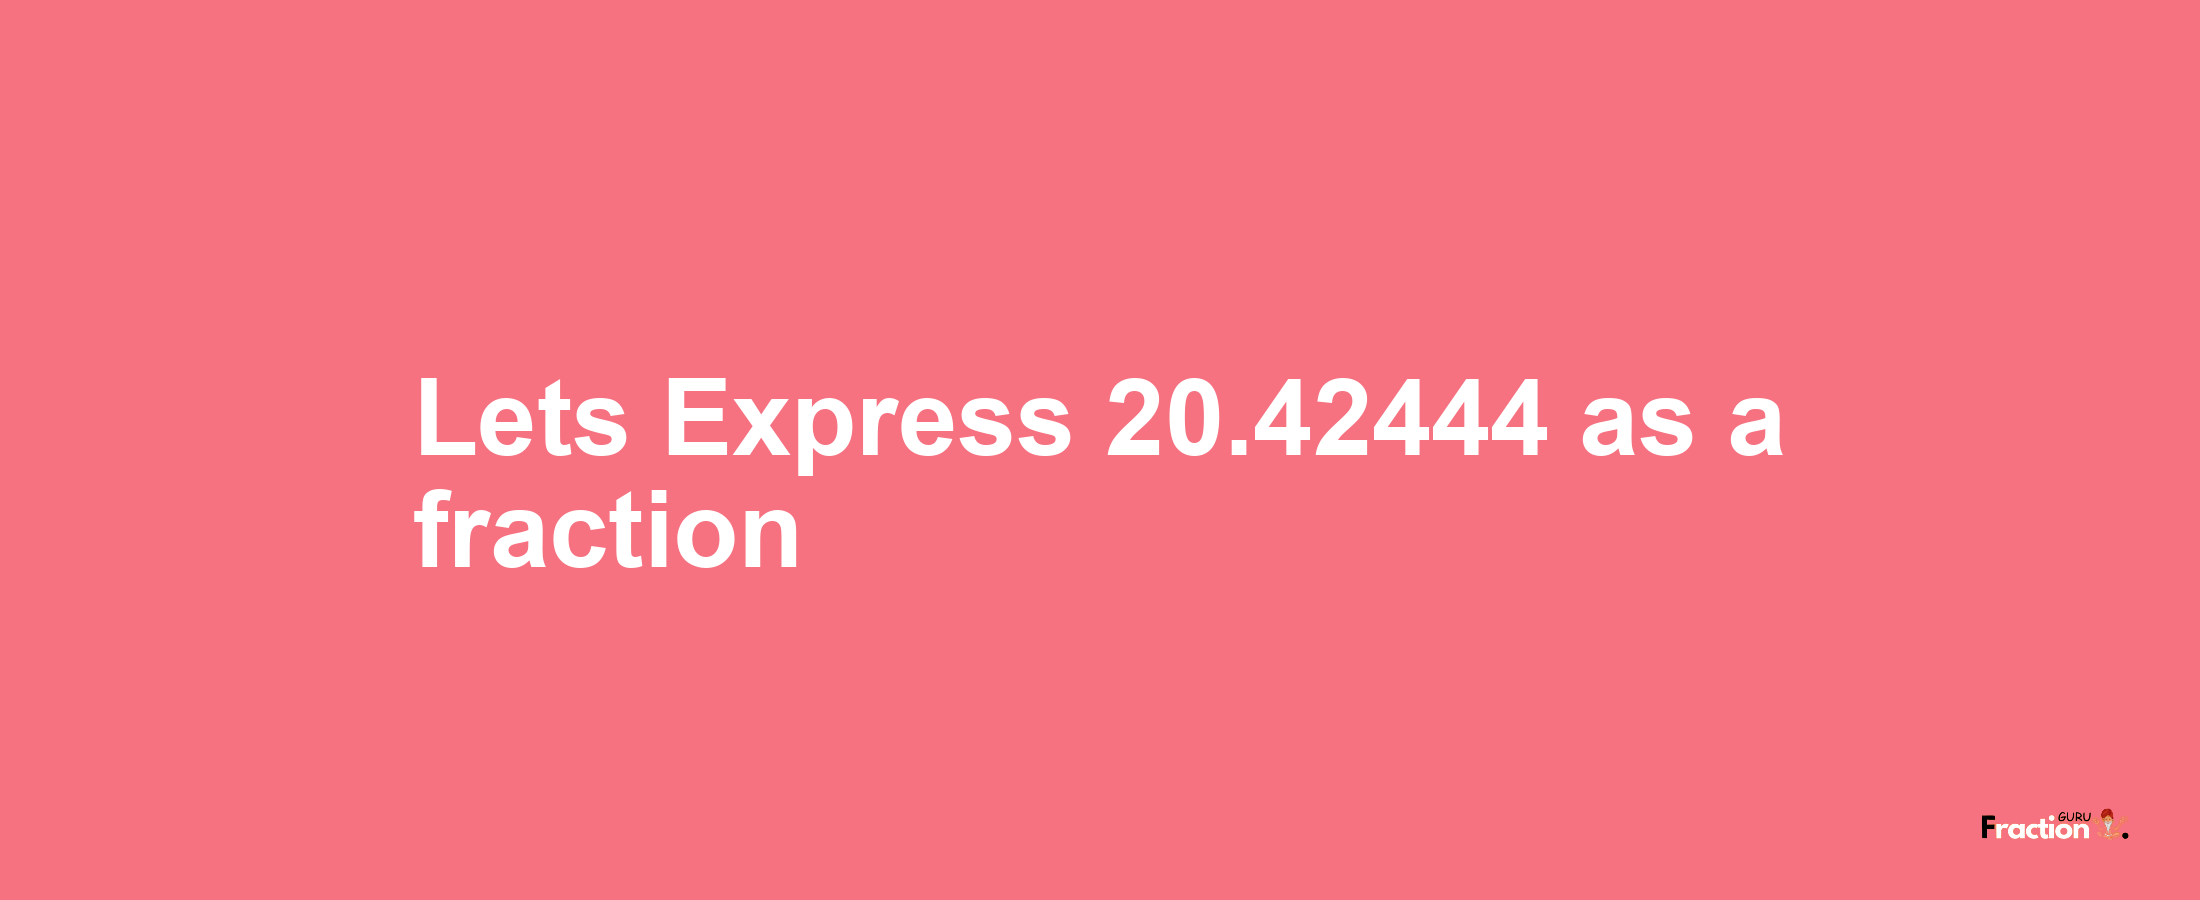 Lets Express 20.42444 as afraction